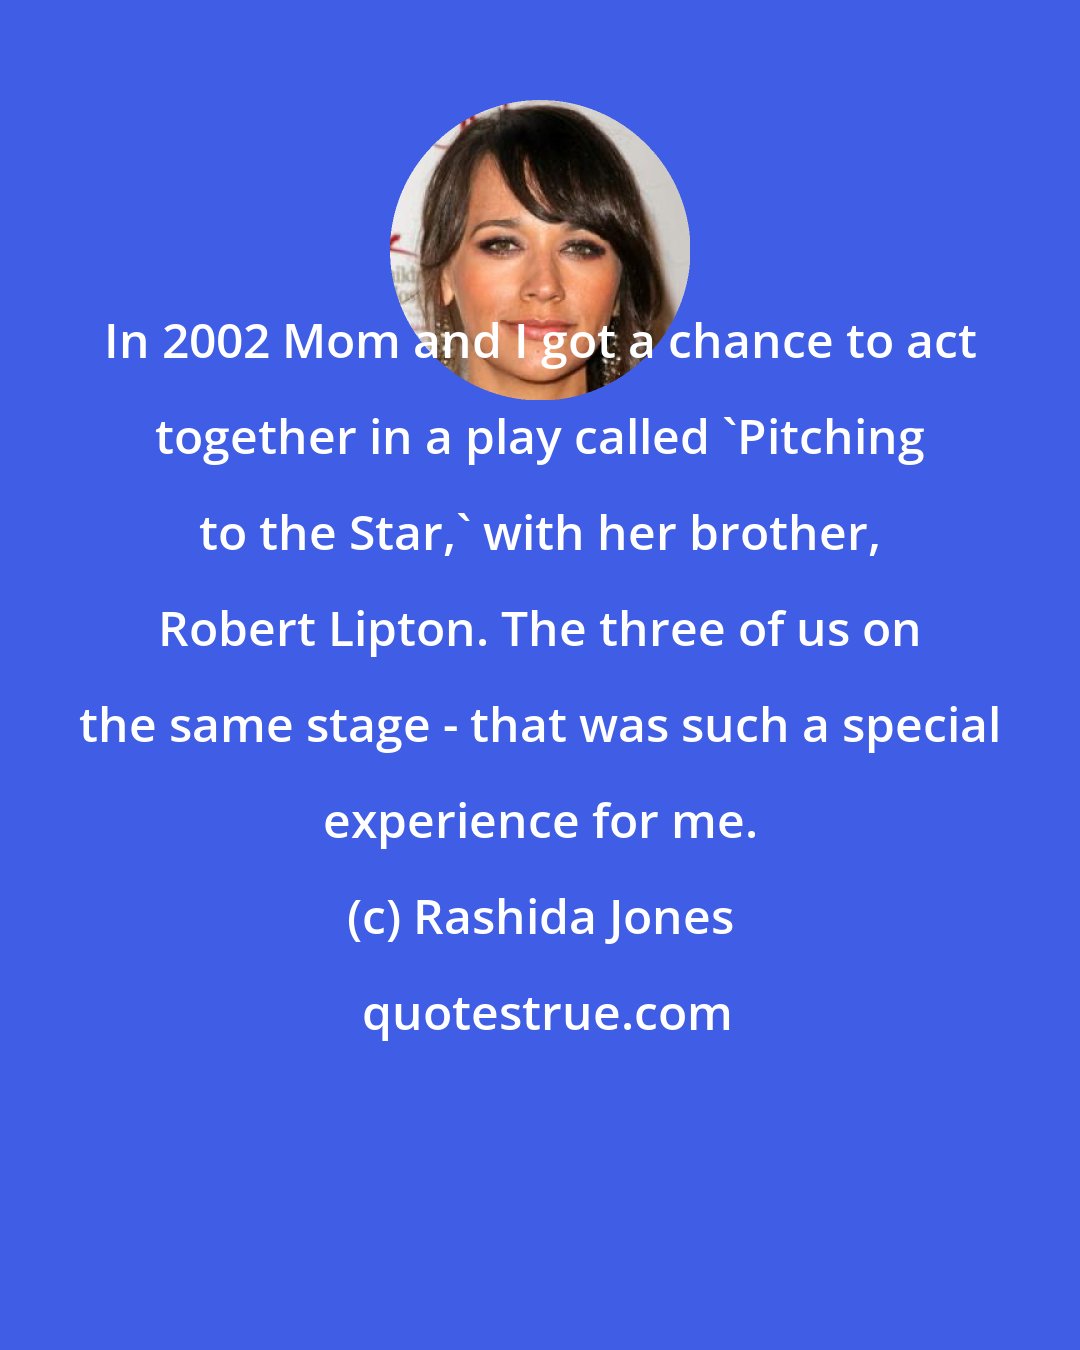 Rashida Jones: In 2002 Mom and I got a chance to act together in a play called 'Pitching to the Star,' with her brother, Robert Lipton. The three of us on the same stage - that was such a special experience for me.